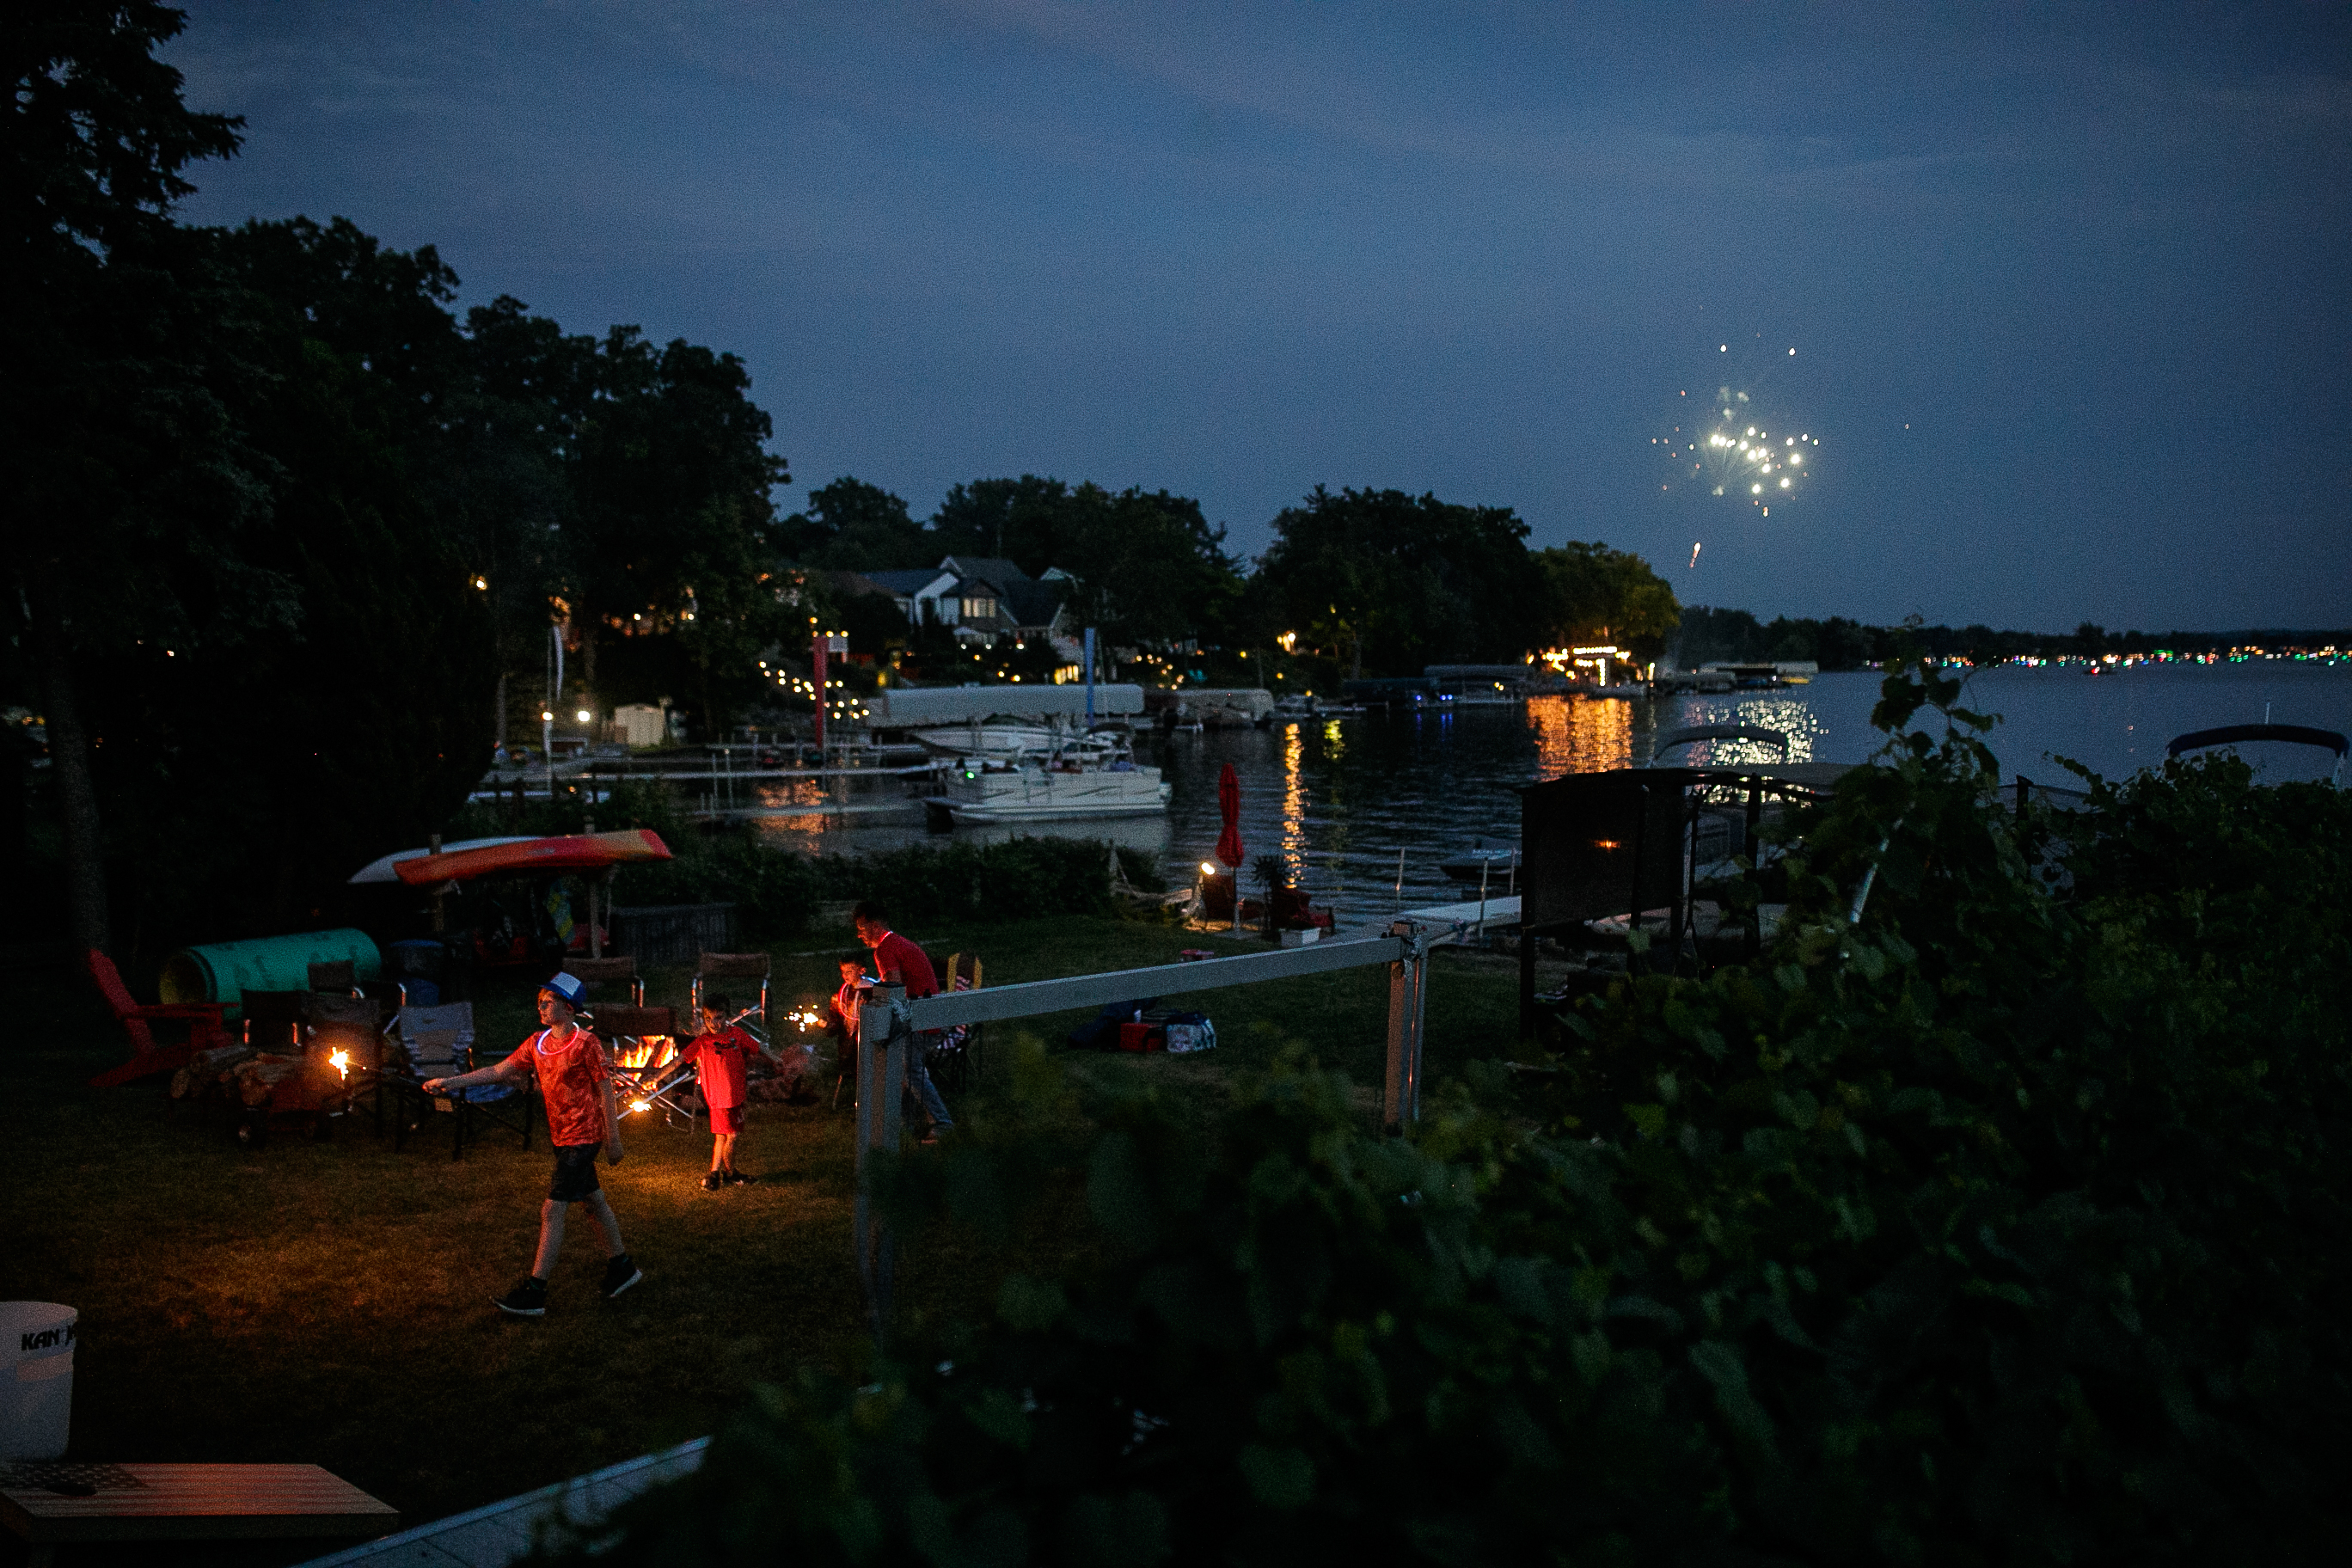 A family plays with sparklers in the their backyard before the annual Lake Fenton Fireworks on the water in front of the Township hall on Saturday, June 2, 2022 in Fenton Township. (Jenifer Veloso | MLive.com)

